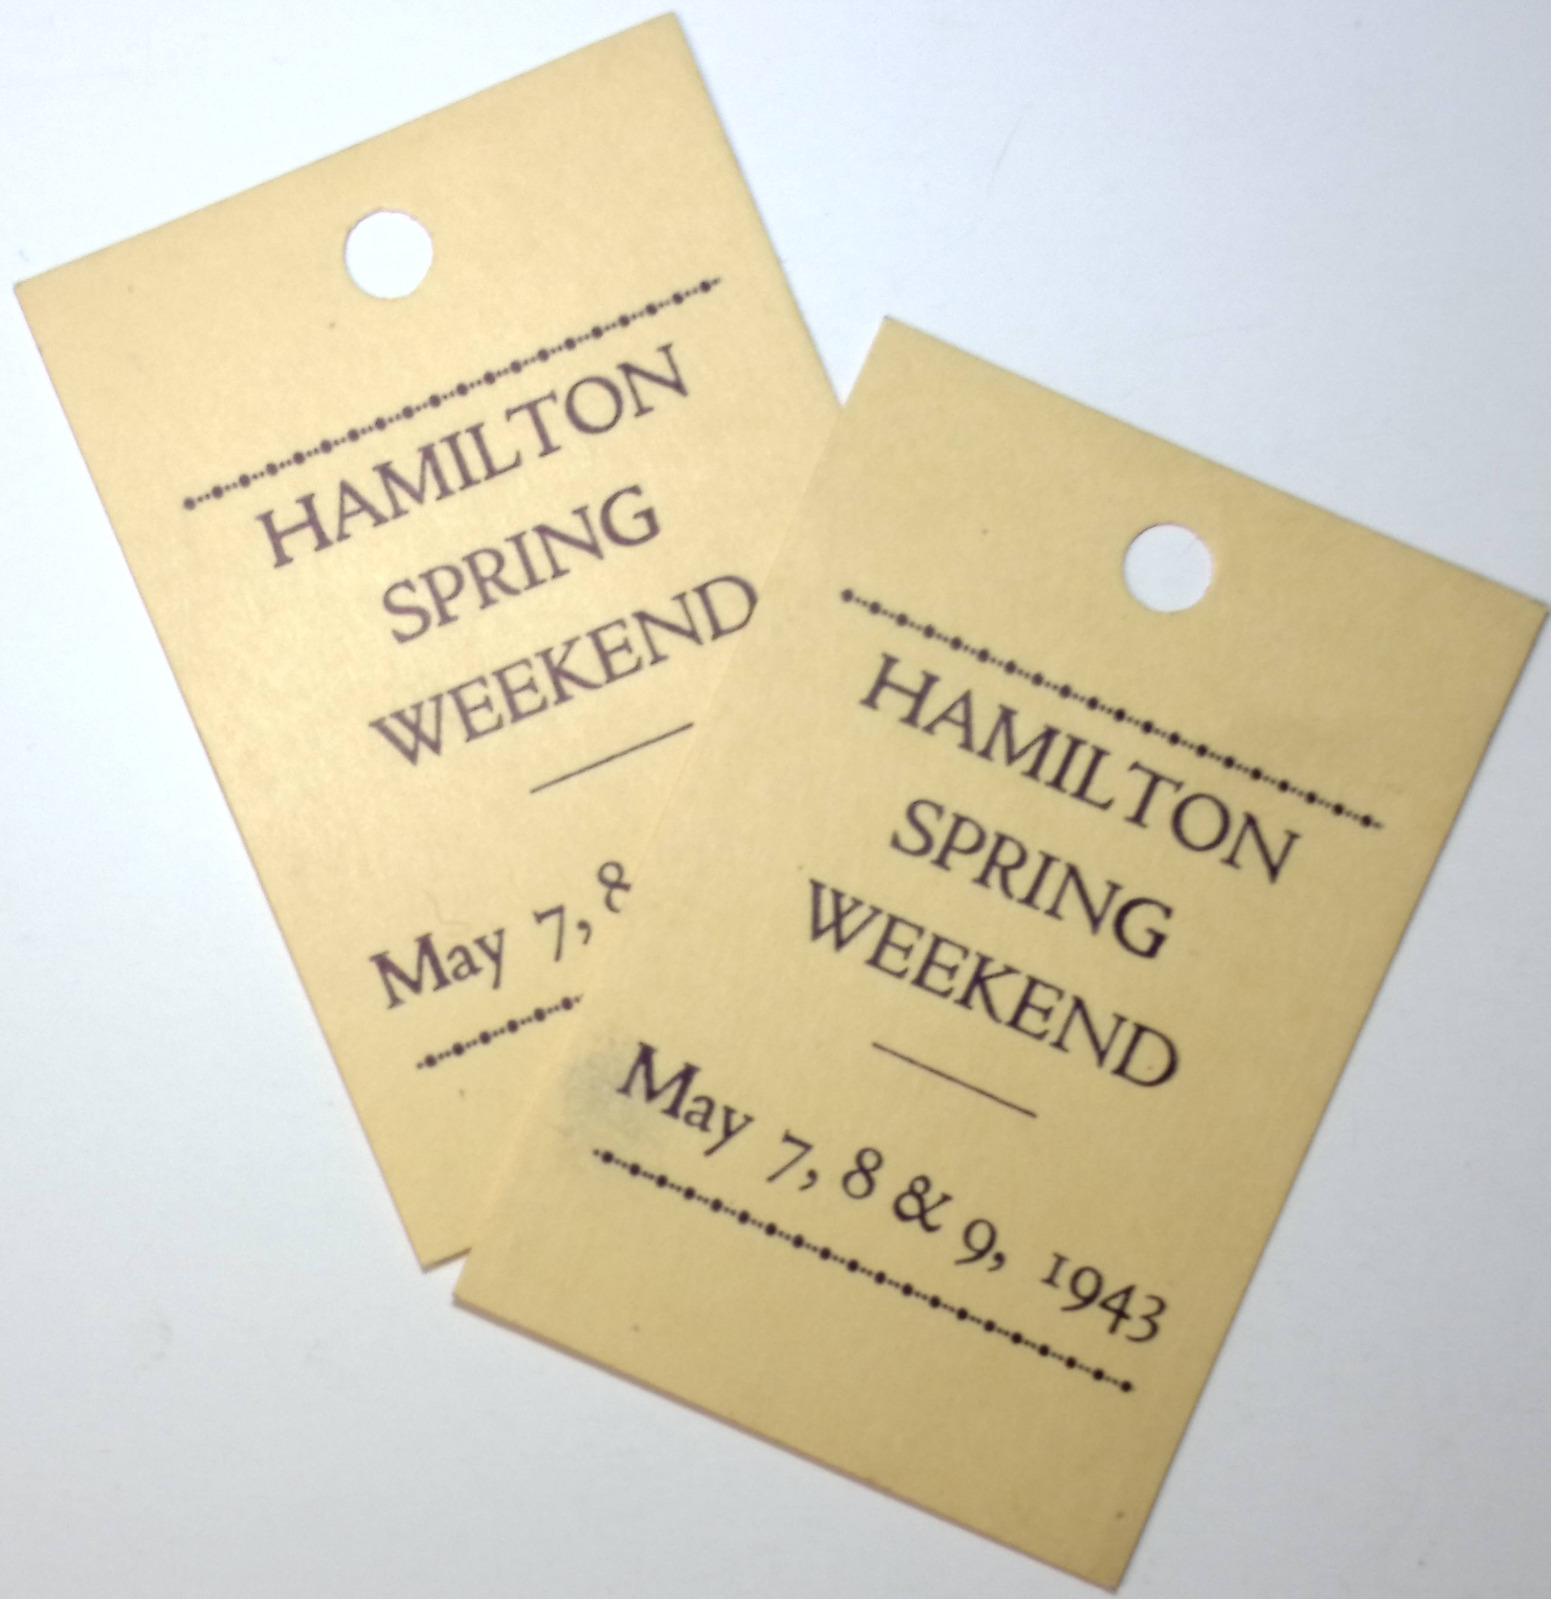 1943 Hamilton College Spring Weekend Admission Ticket Lot of 2 CLINTON NY